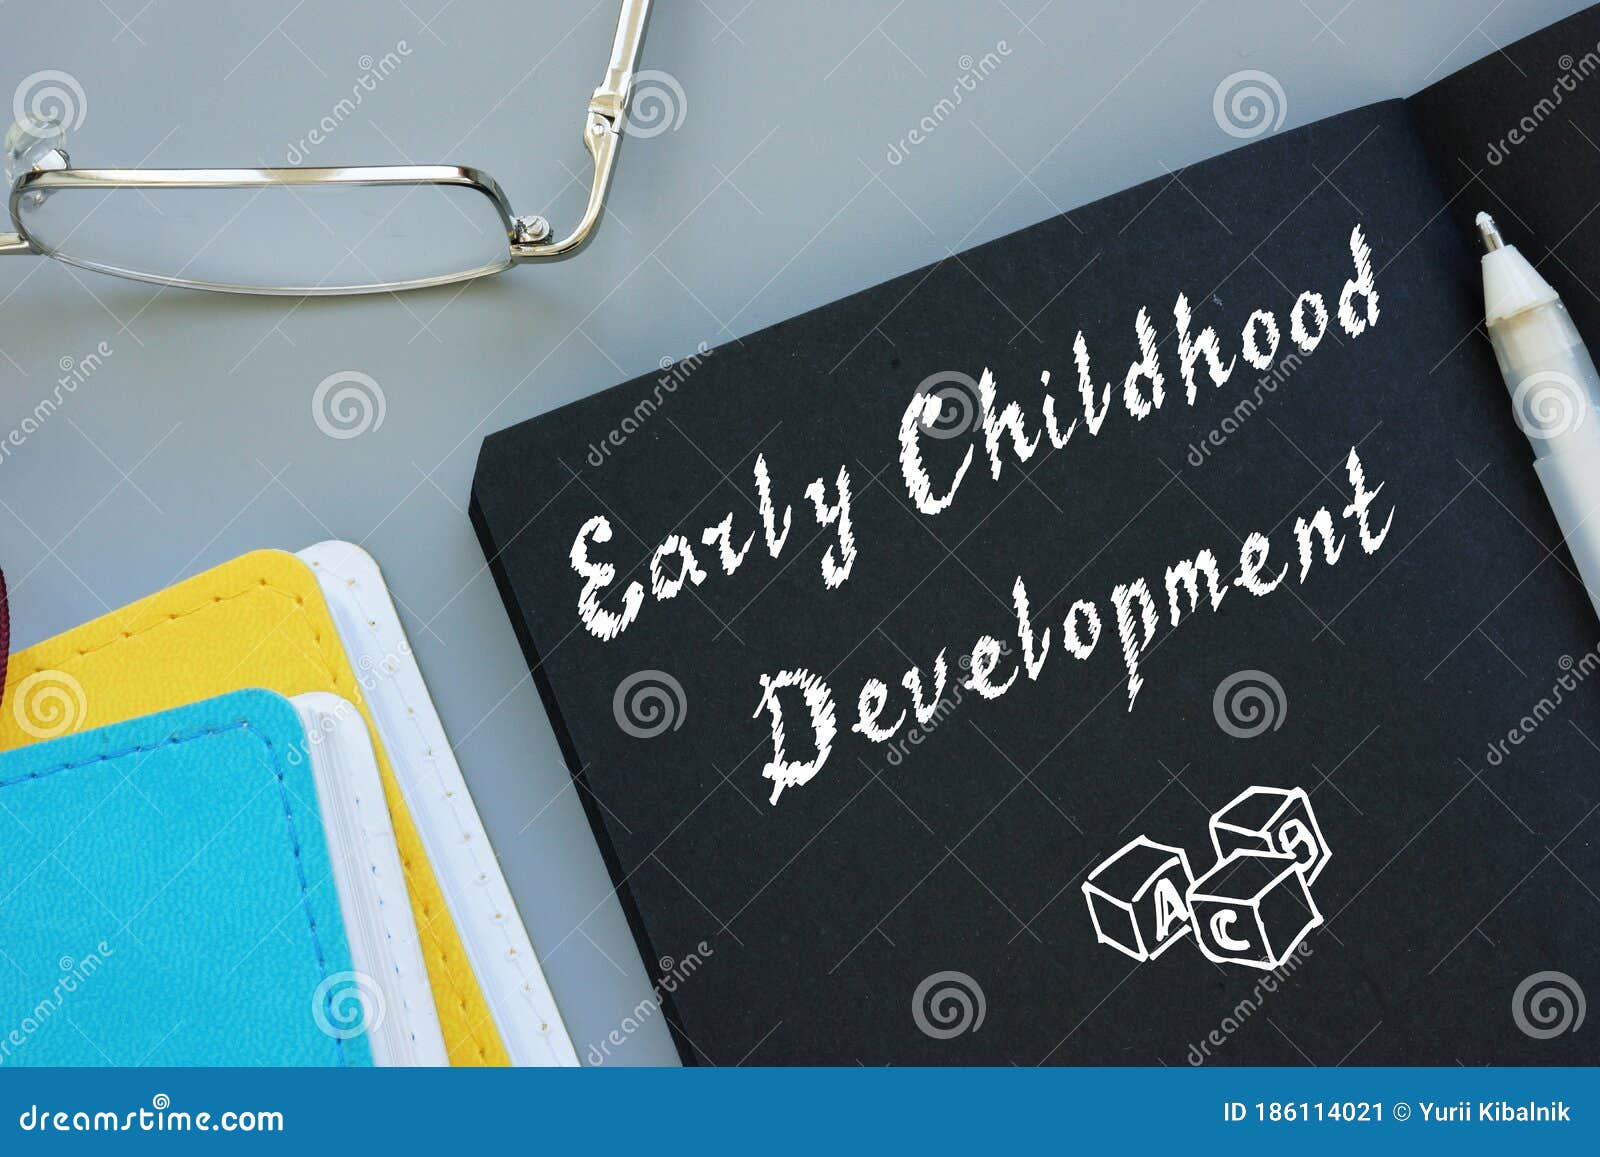 educational concept meaning early childhood development with sign on the sheet